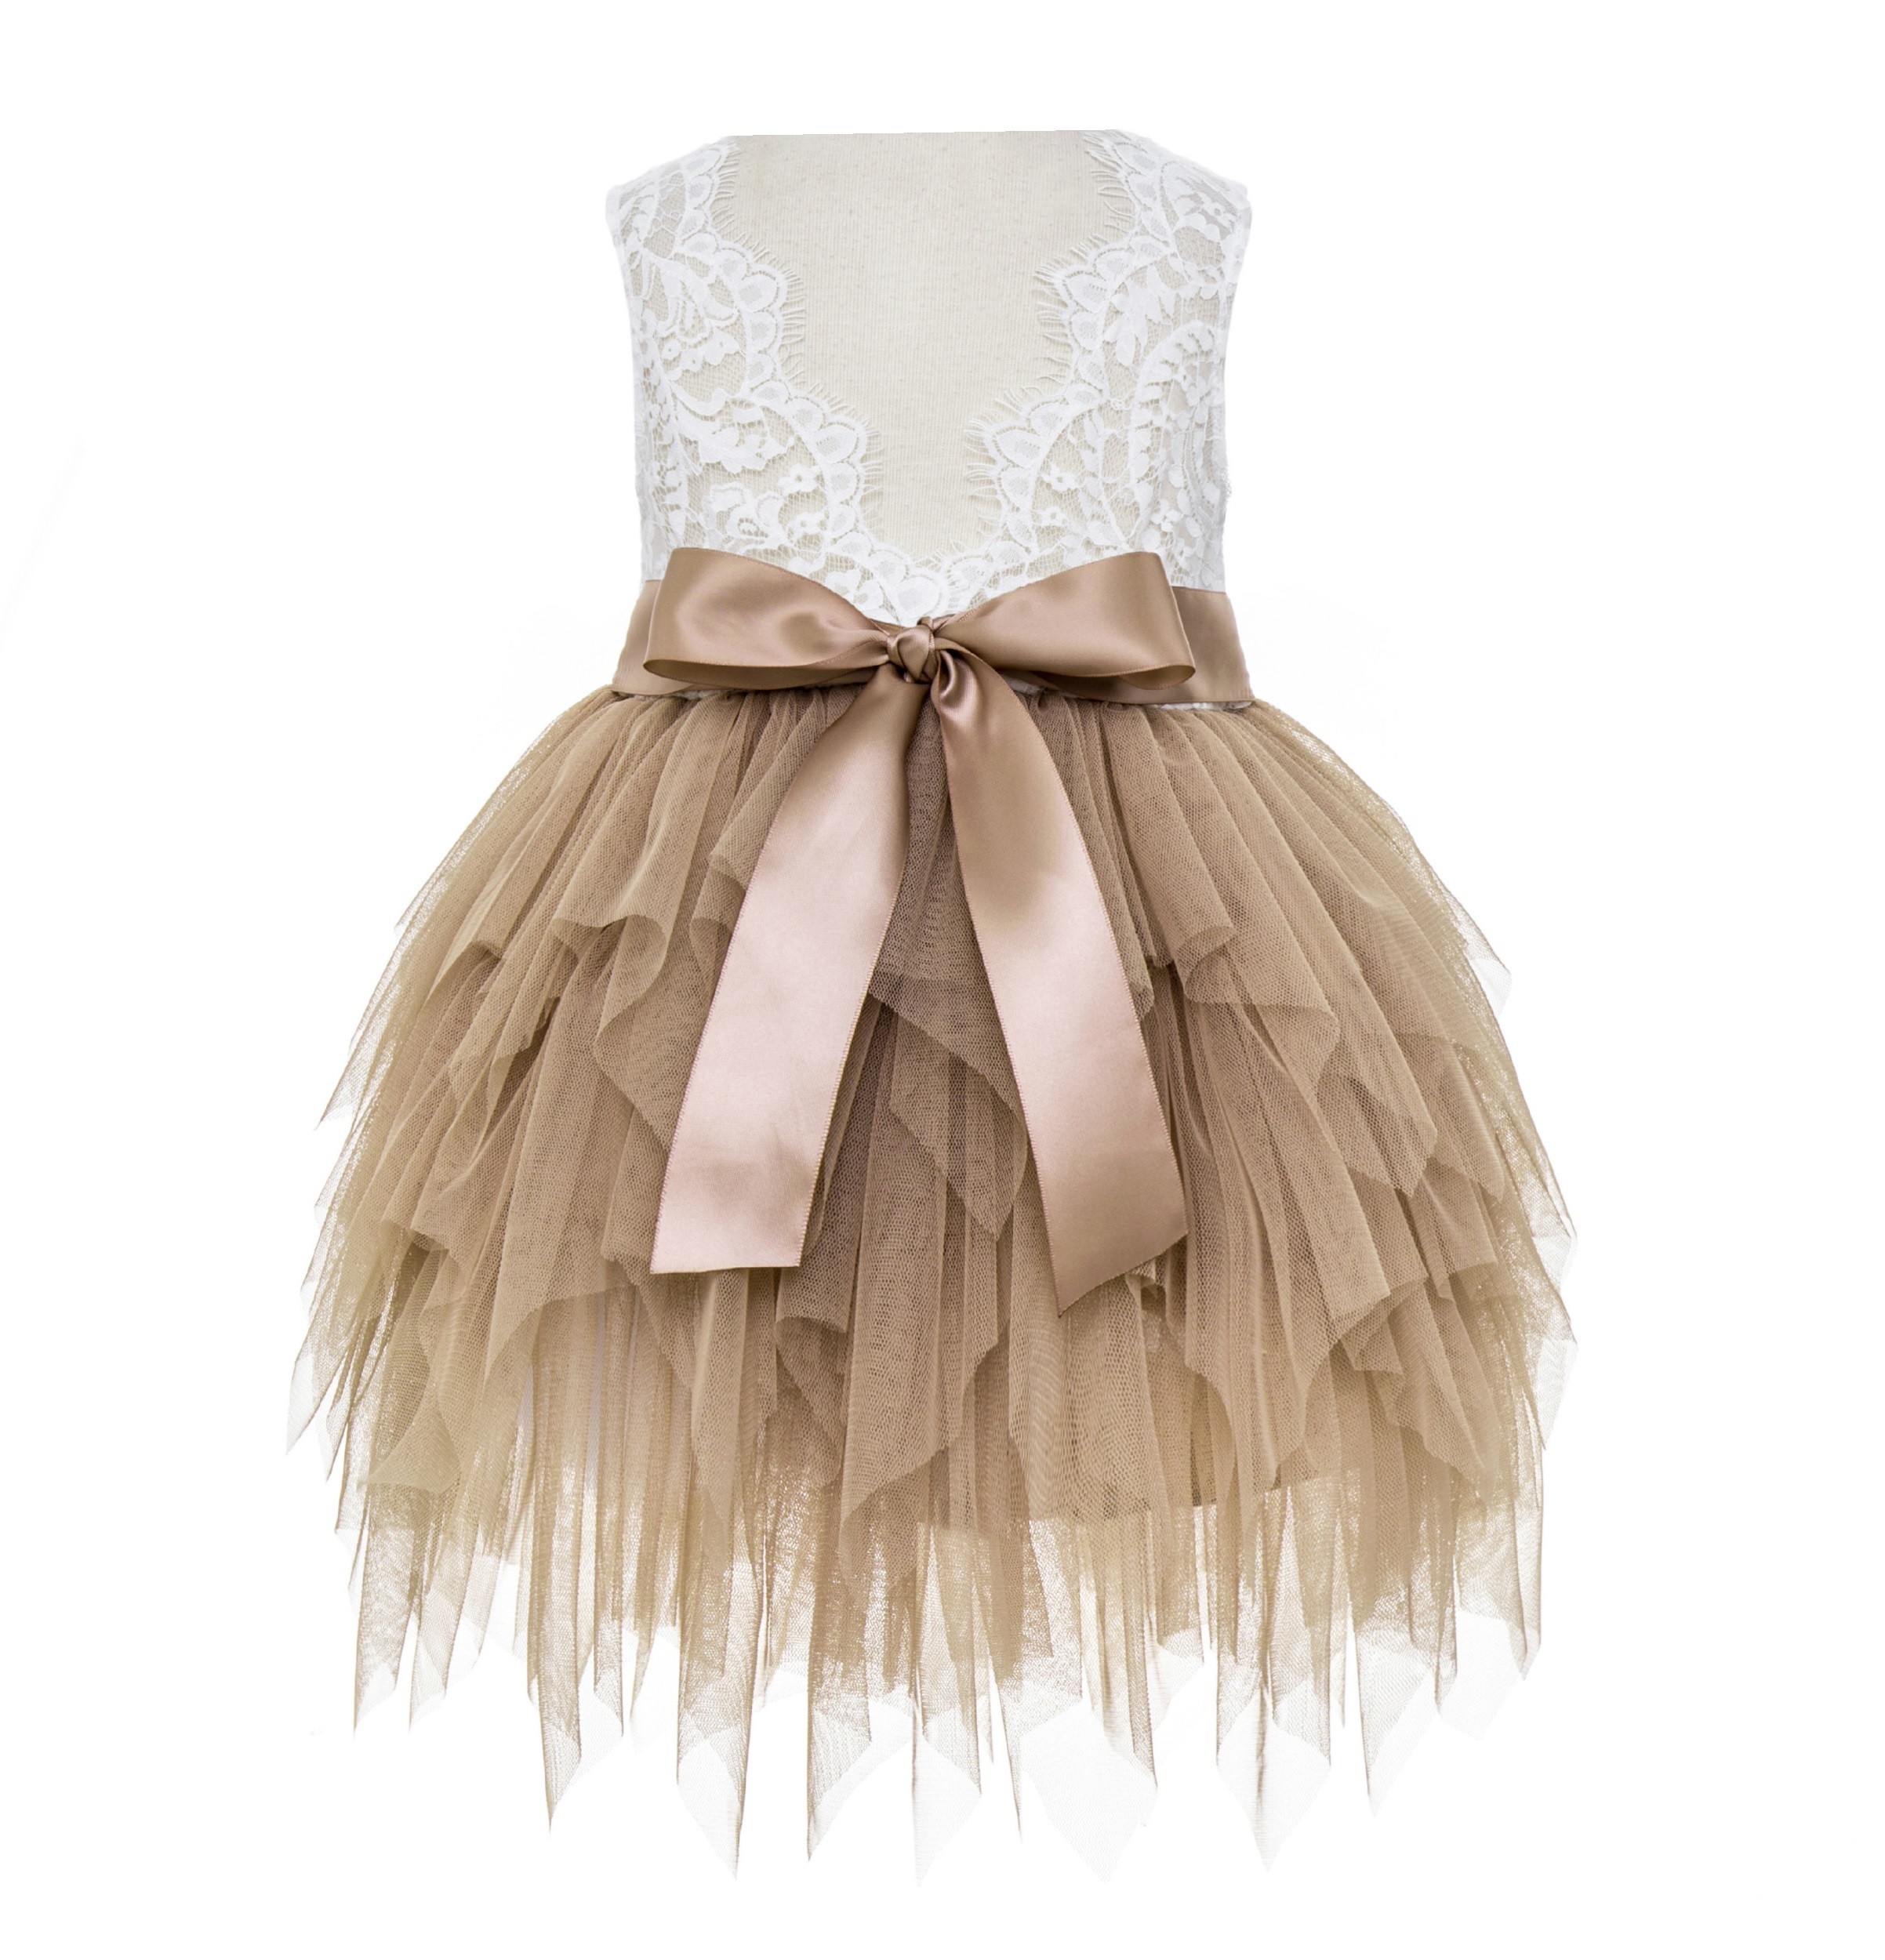 Rose Gold Tiered Tulle Flower Girl Dress Lace Back Dress LG6